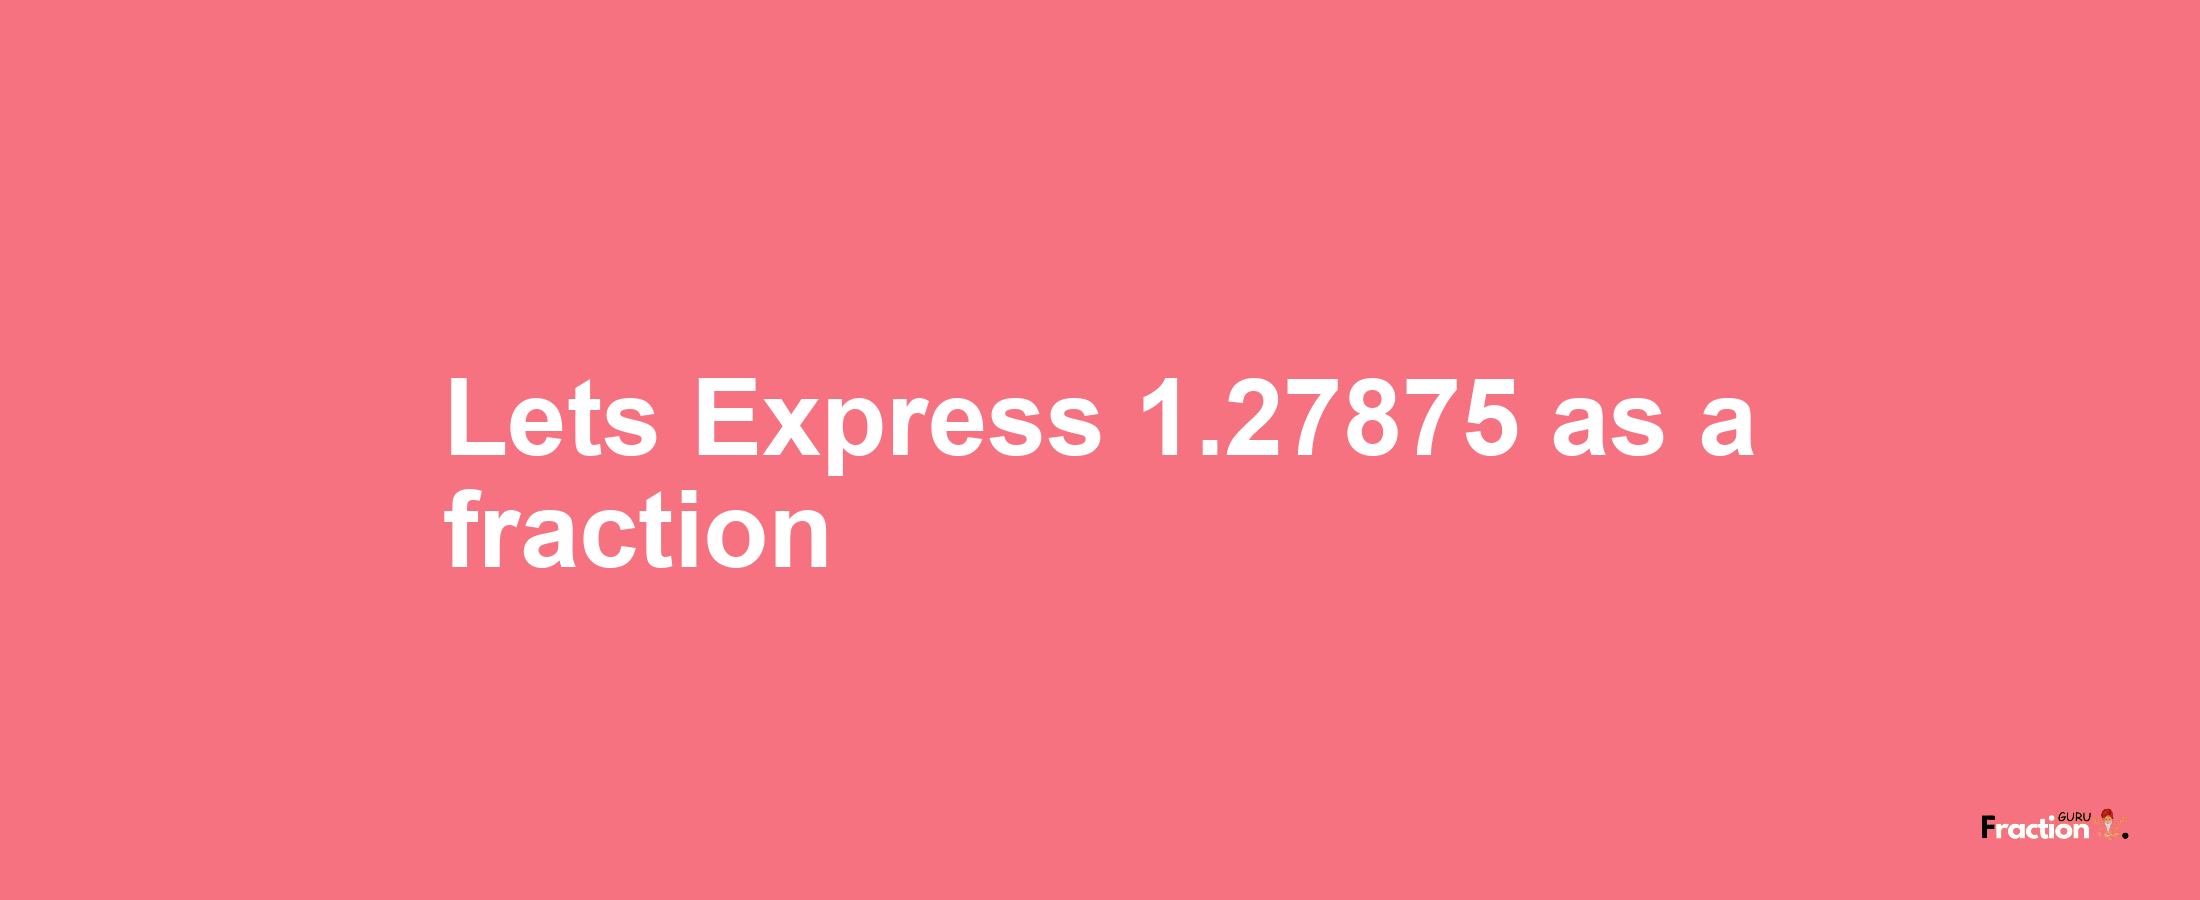 Lets Express 1.27875 as afraction